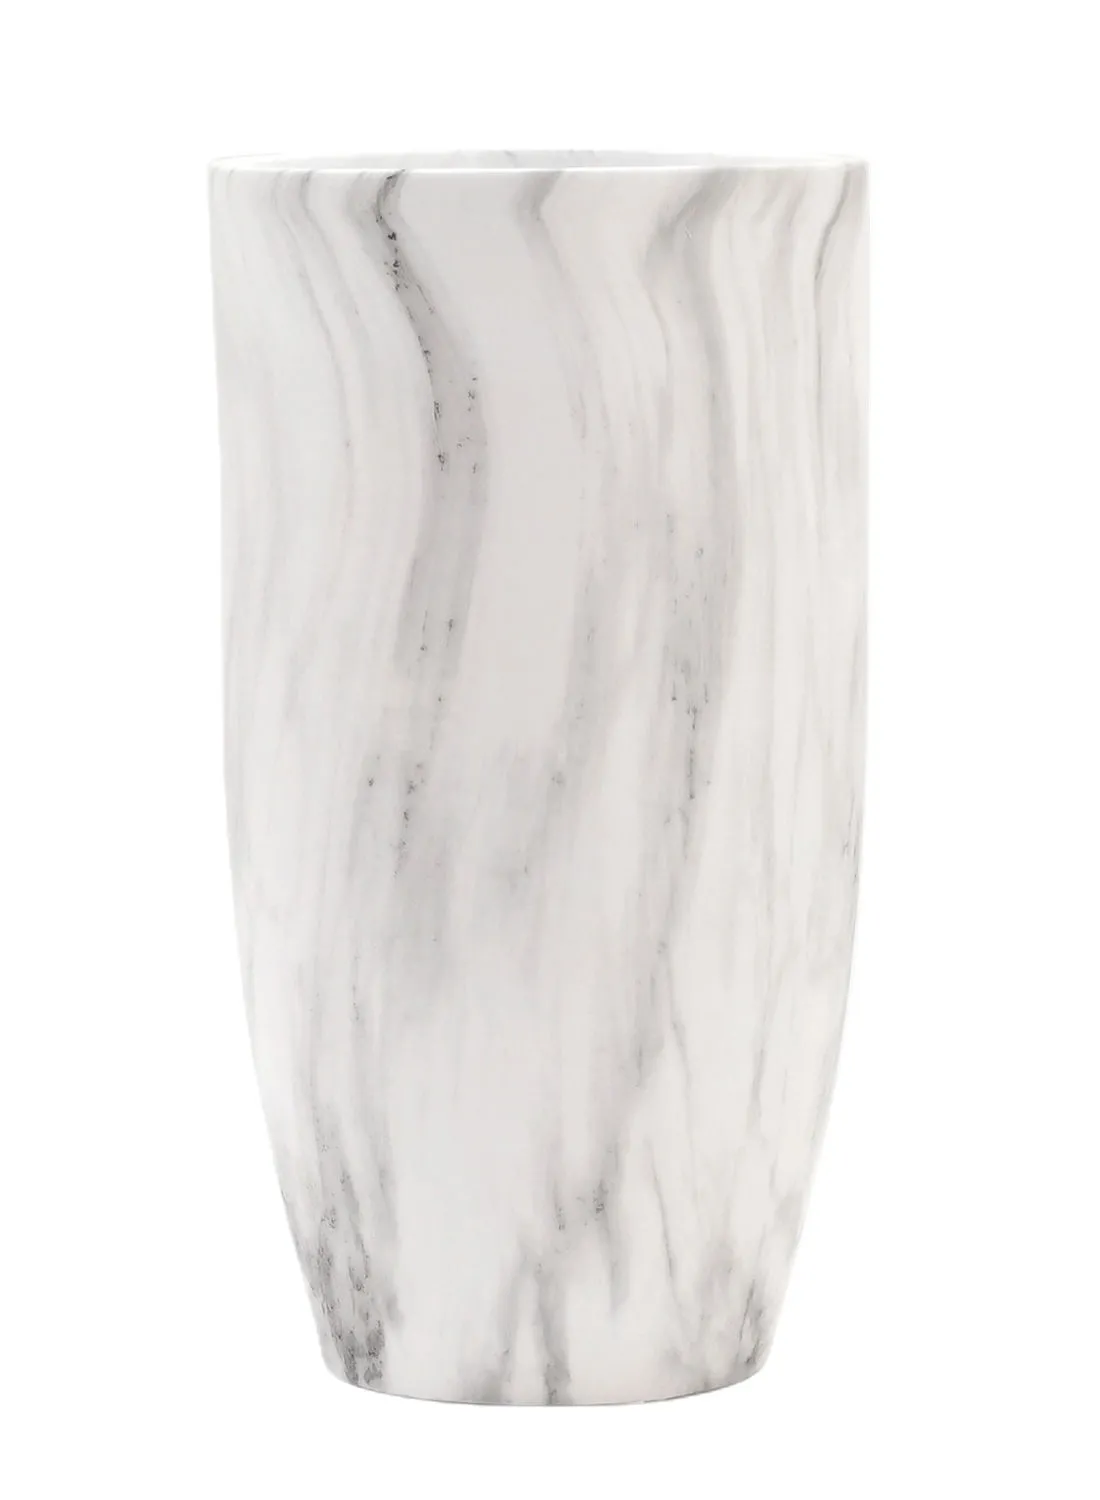 ebb & flow Natural Marble Design Ceramic Vase Unique Luxury Quality Material For The Perfect Stylish Home N13-027 White 24 x 45cm